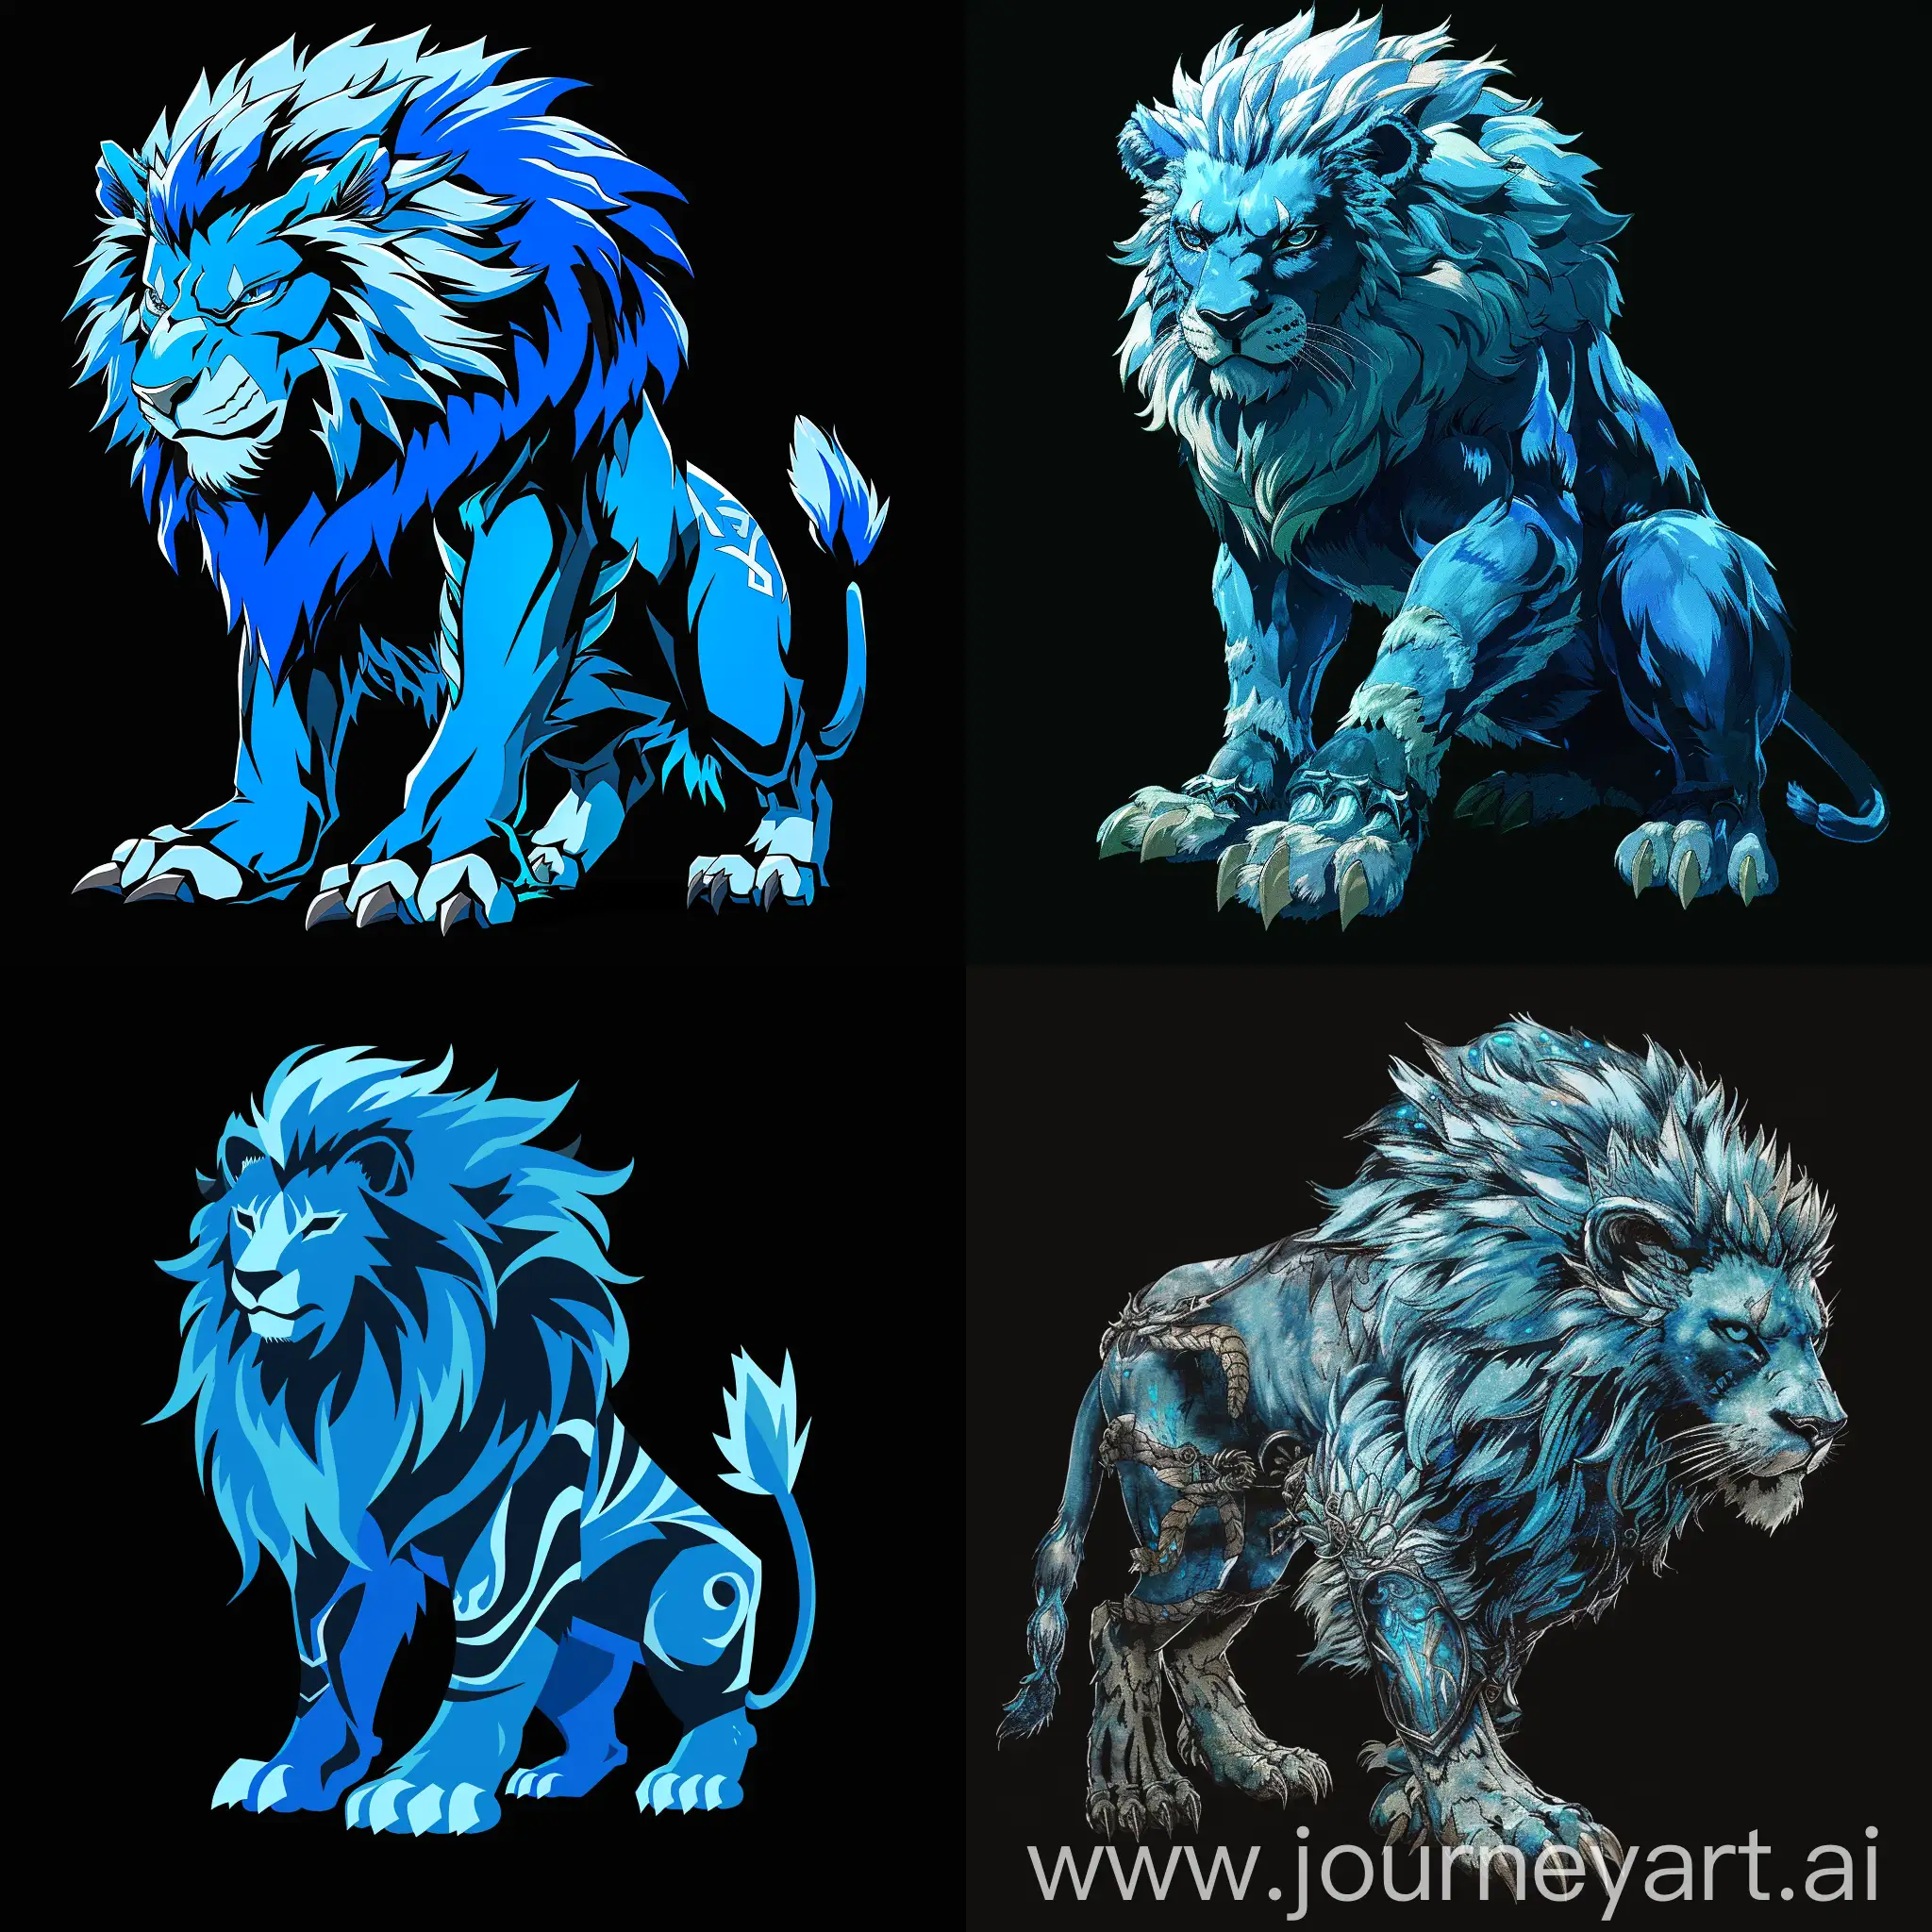 The logo, which depicts a full-length blue lion in the style of the game "Monster hunter: World". Background: black.